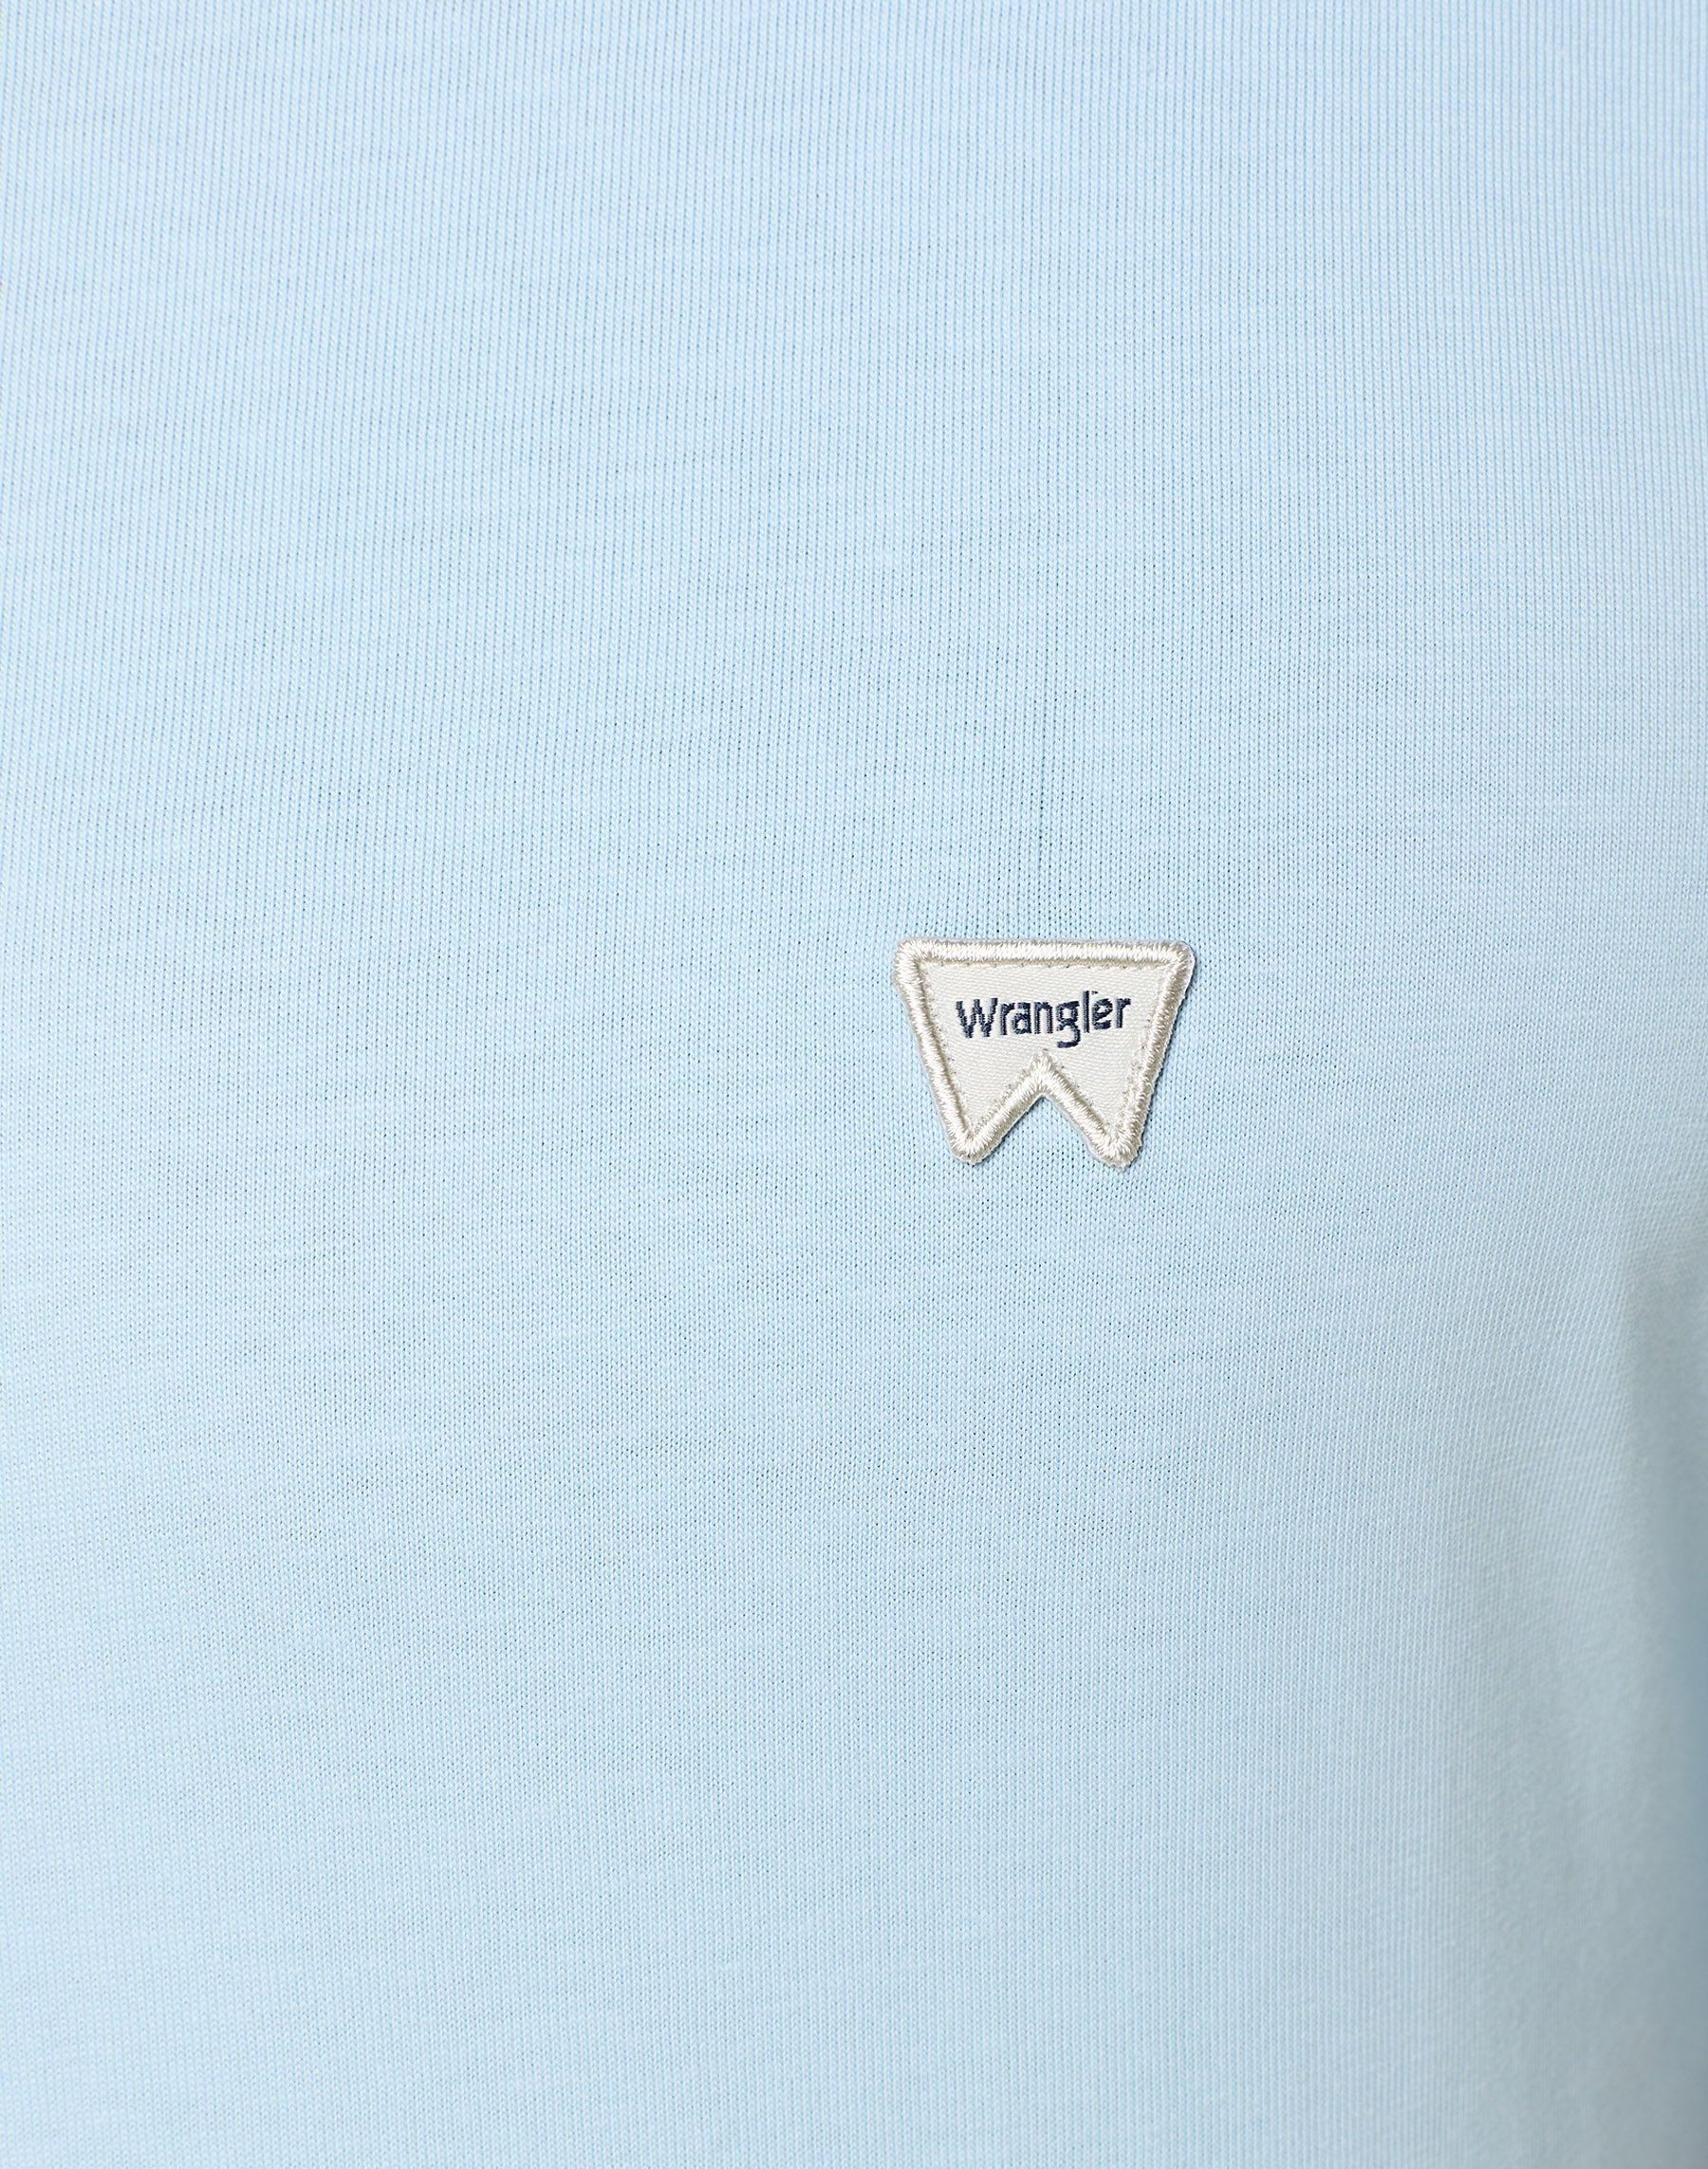 Sign Off Tee in Dream Blue T-Shirts Wrangler   